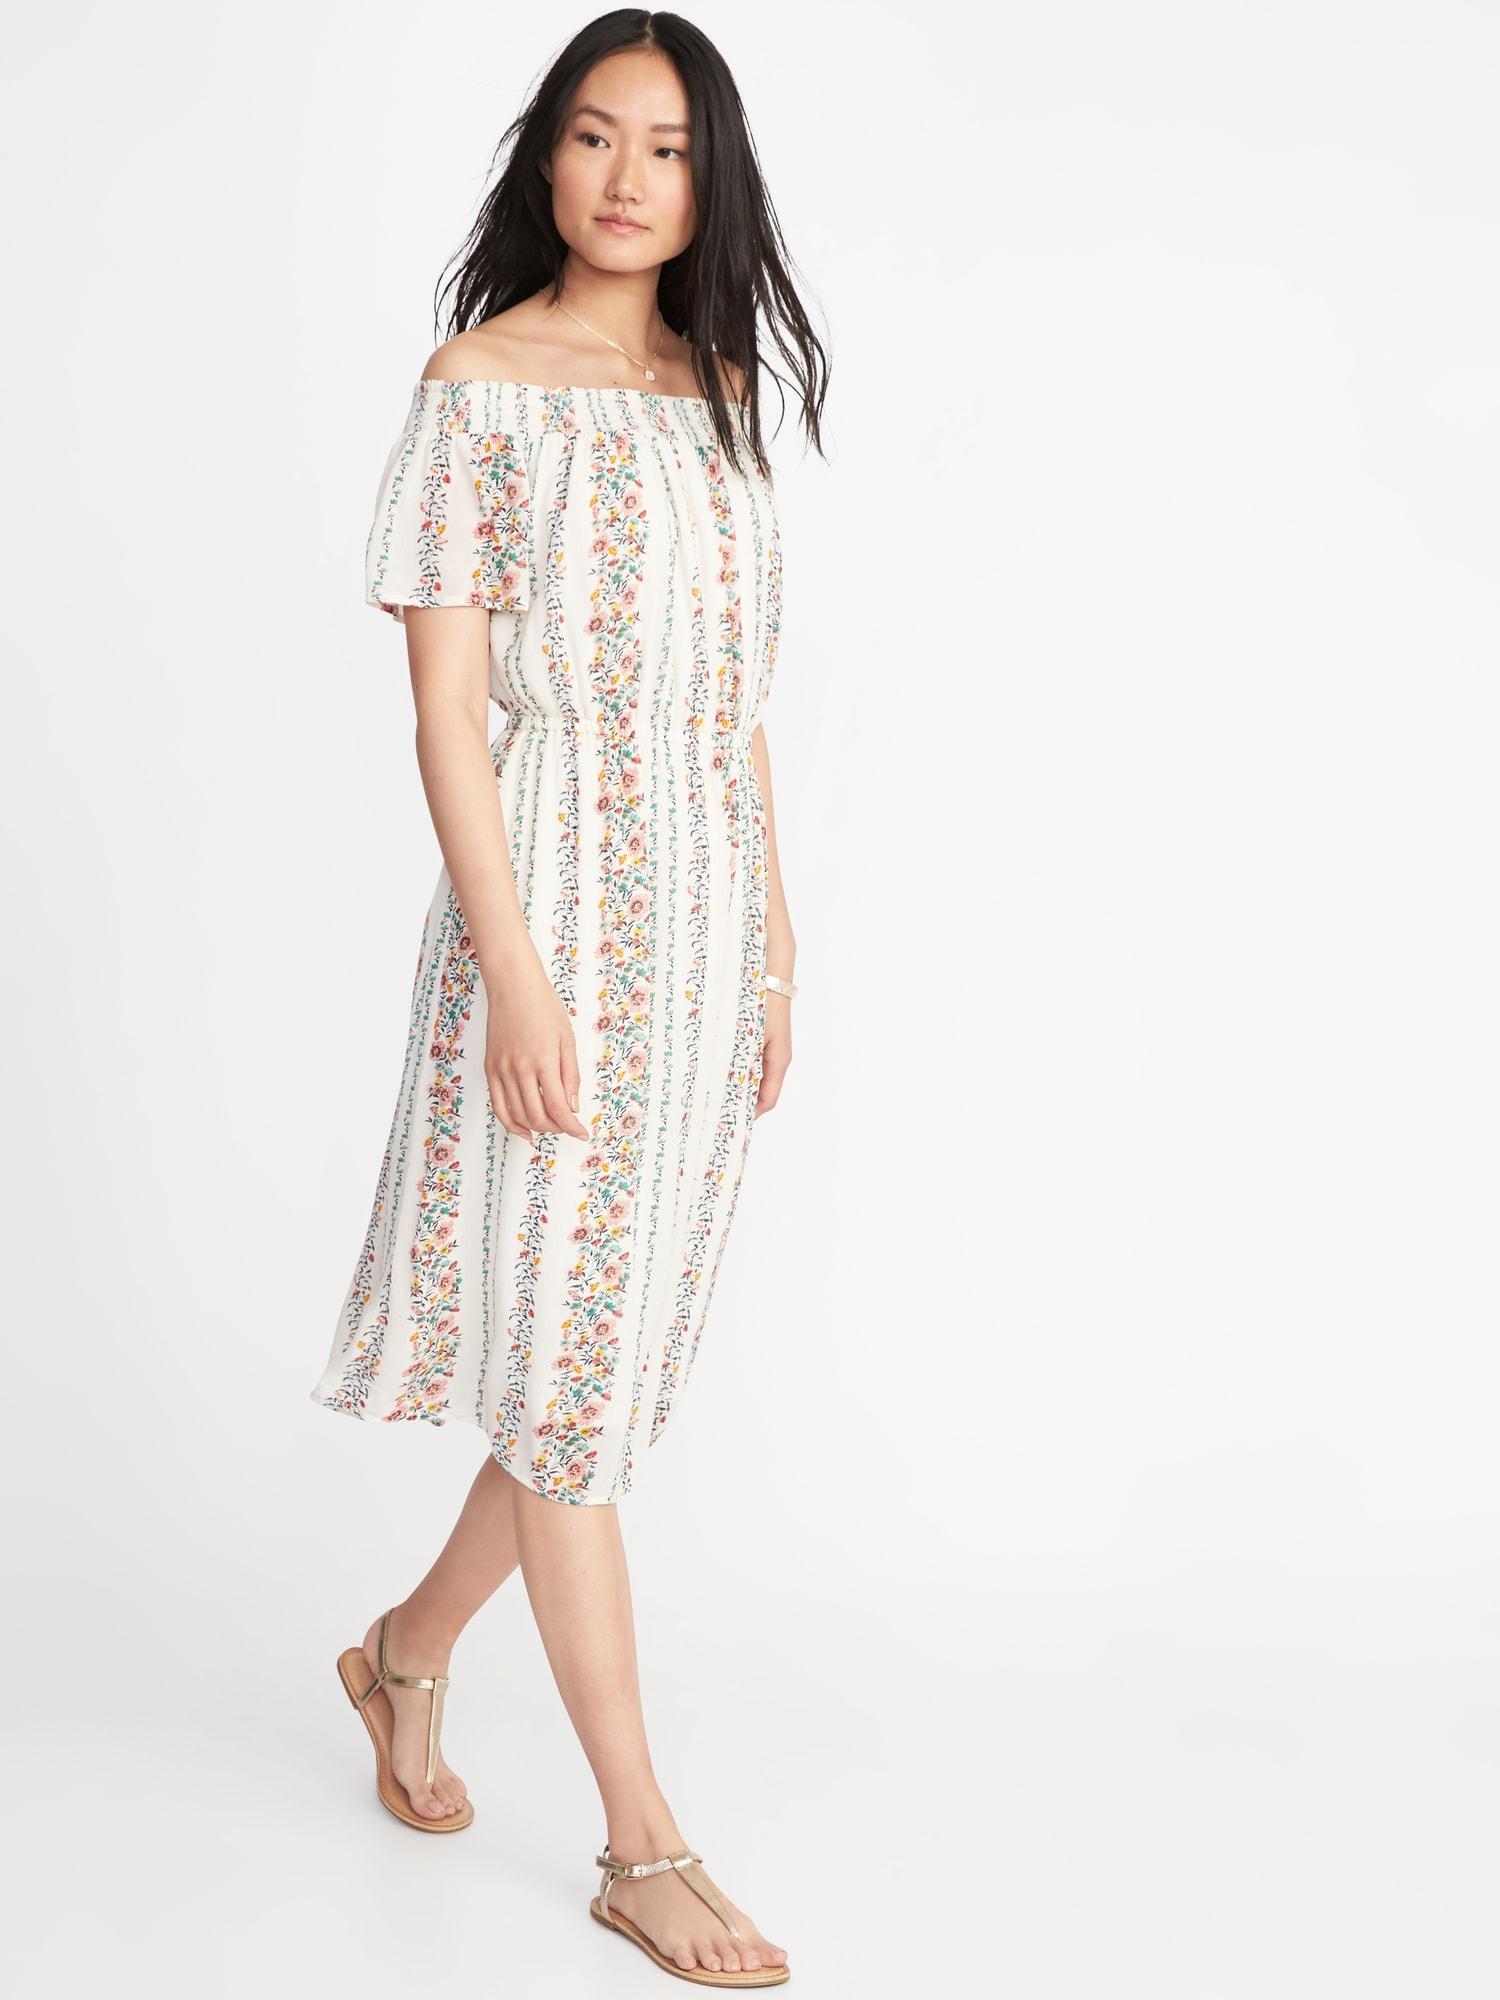 old navy white dress with flowers